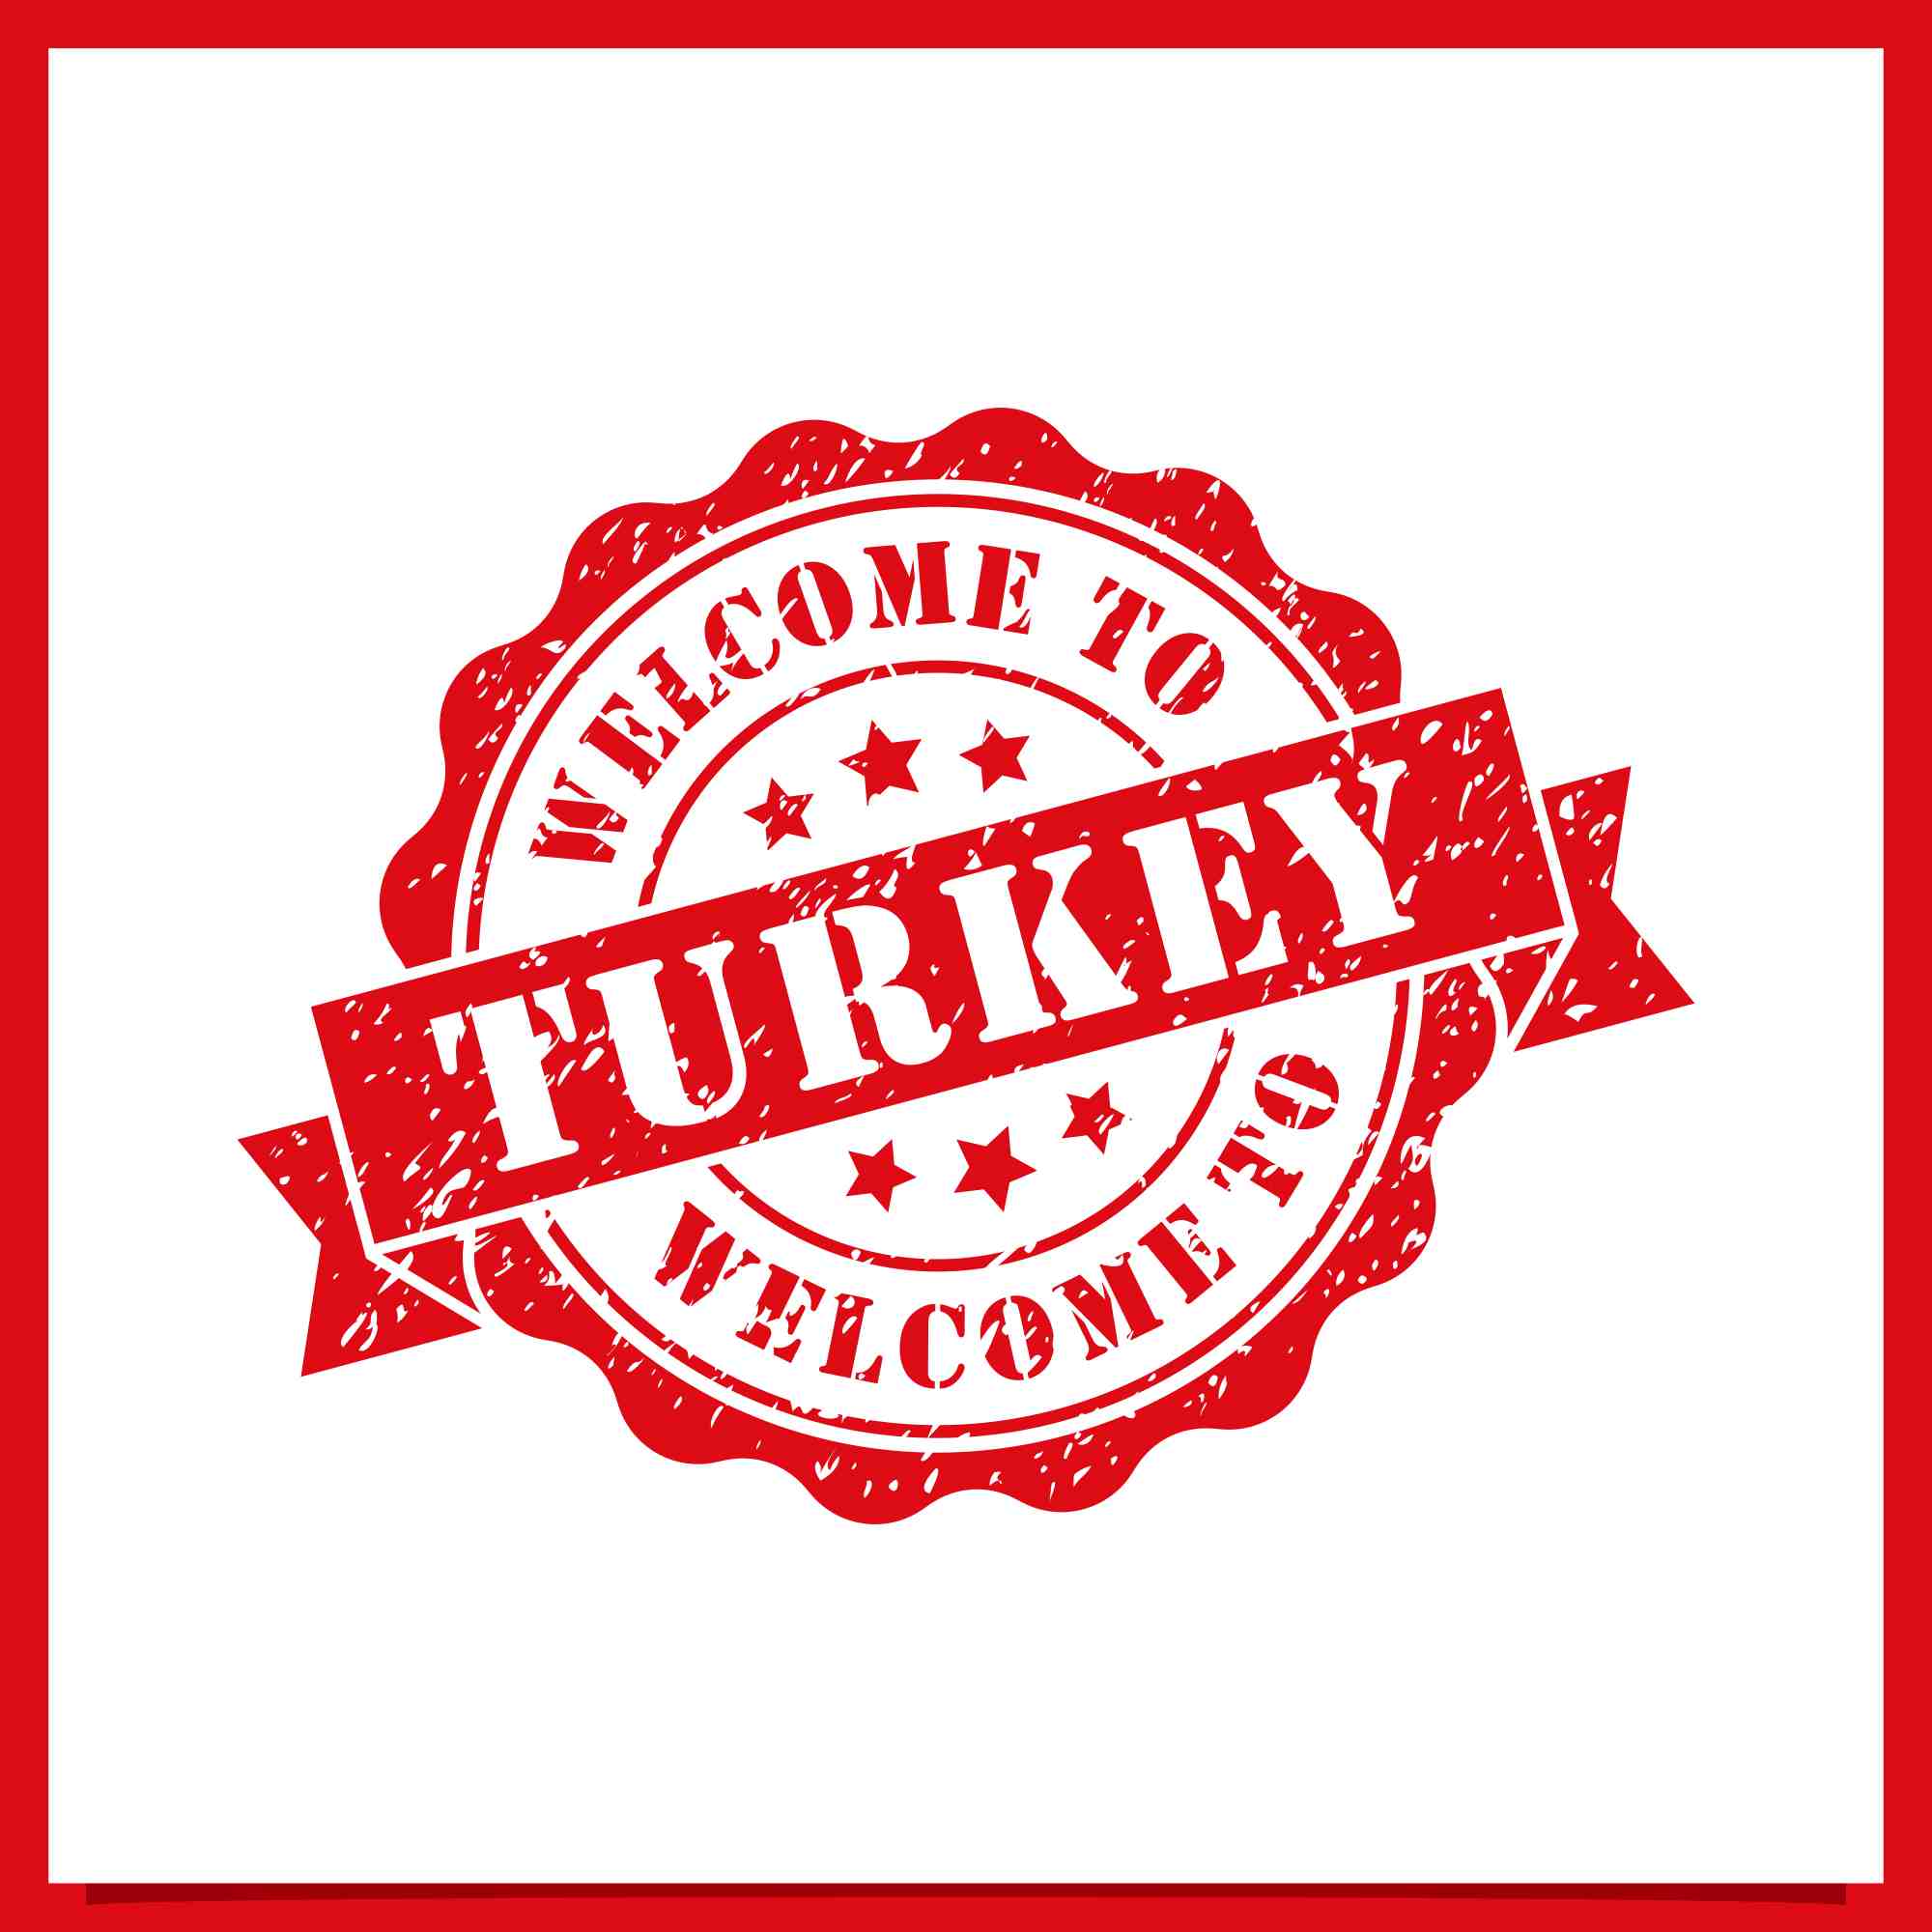 welcome to Istanbul Turkey vector logo collection - $4 preview image.